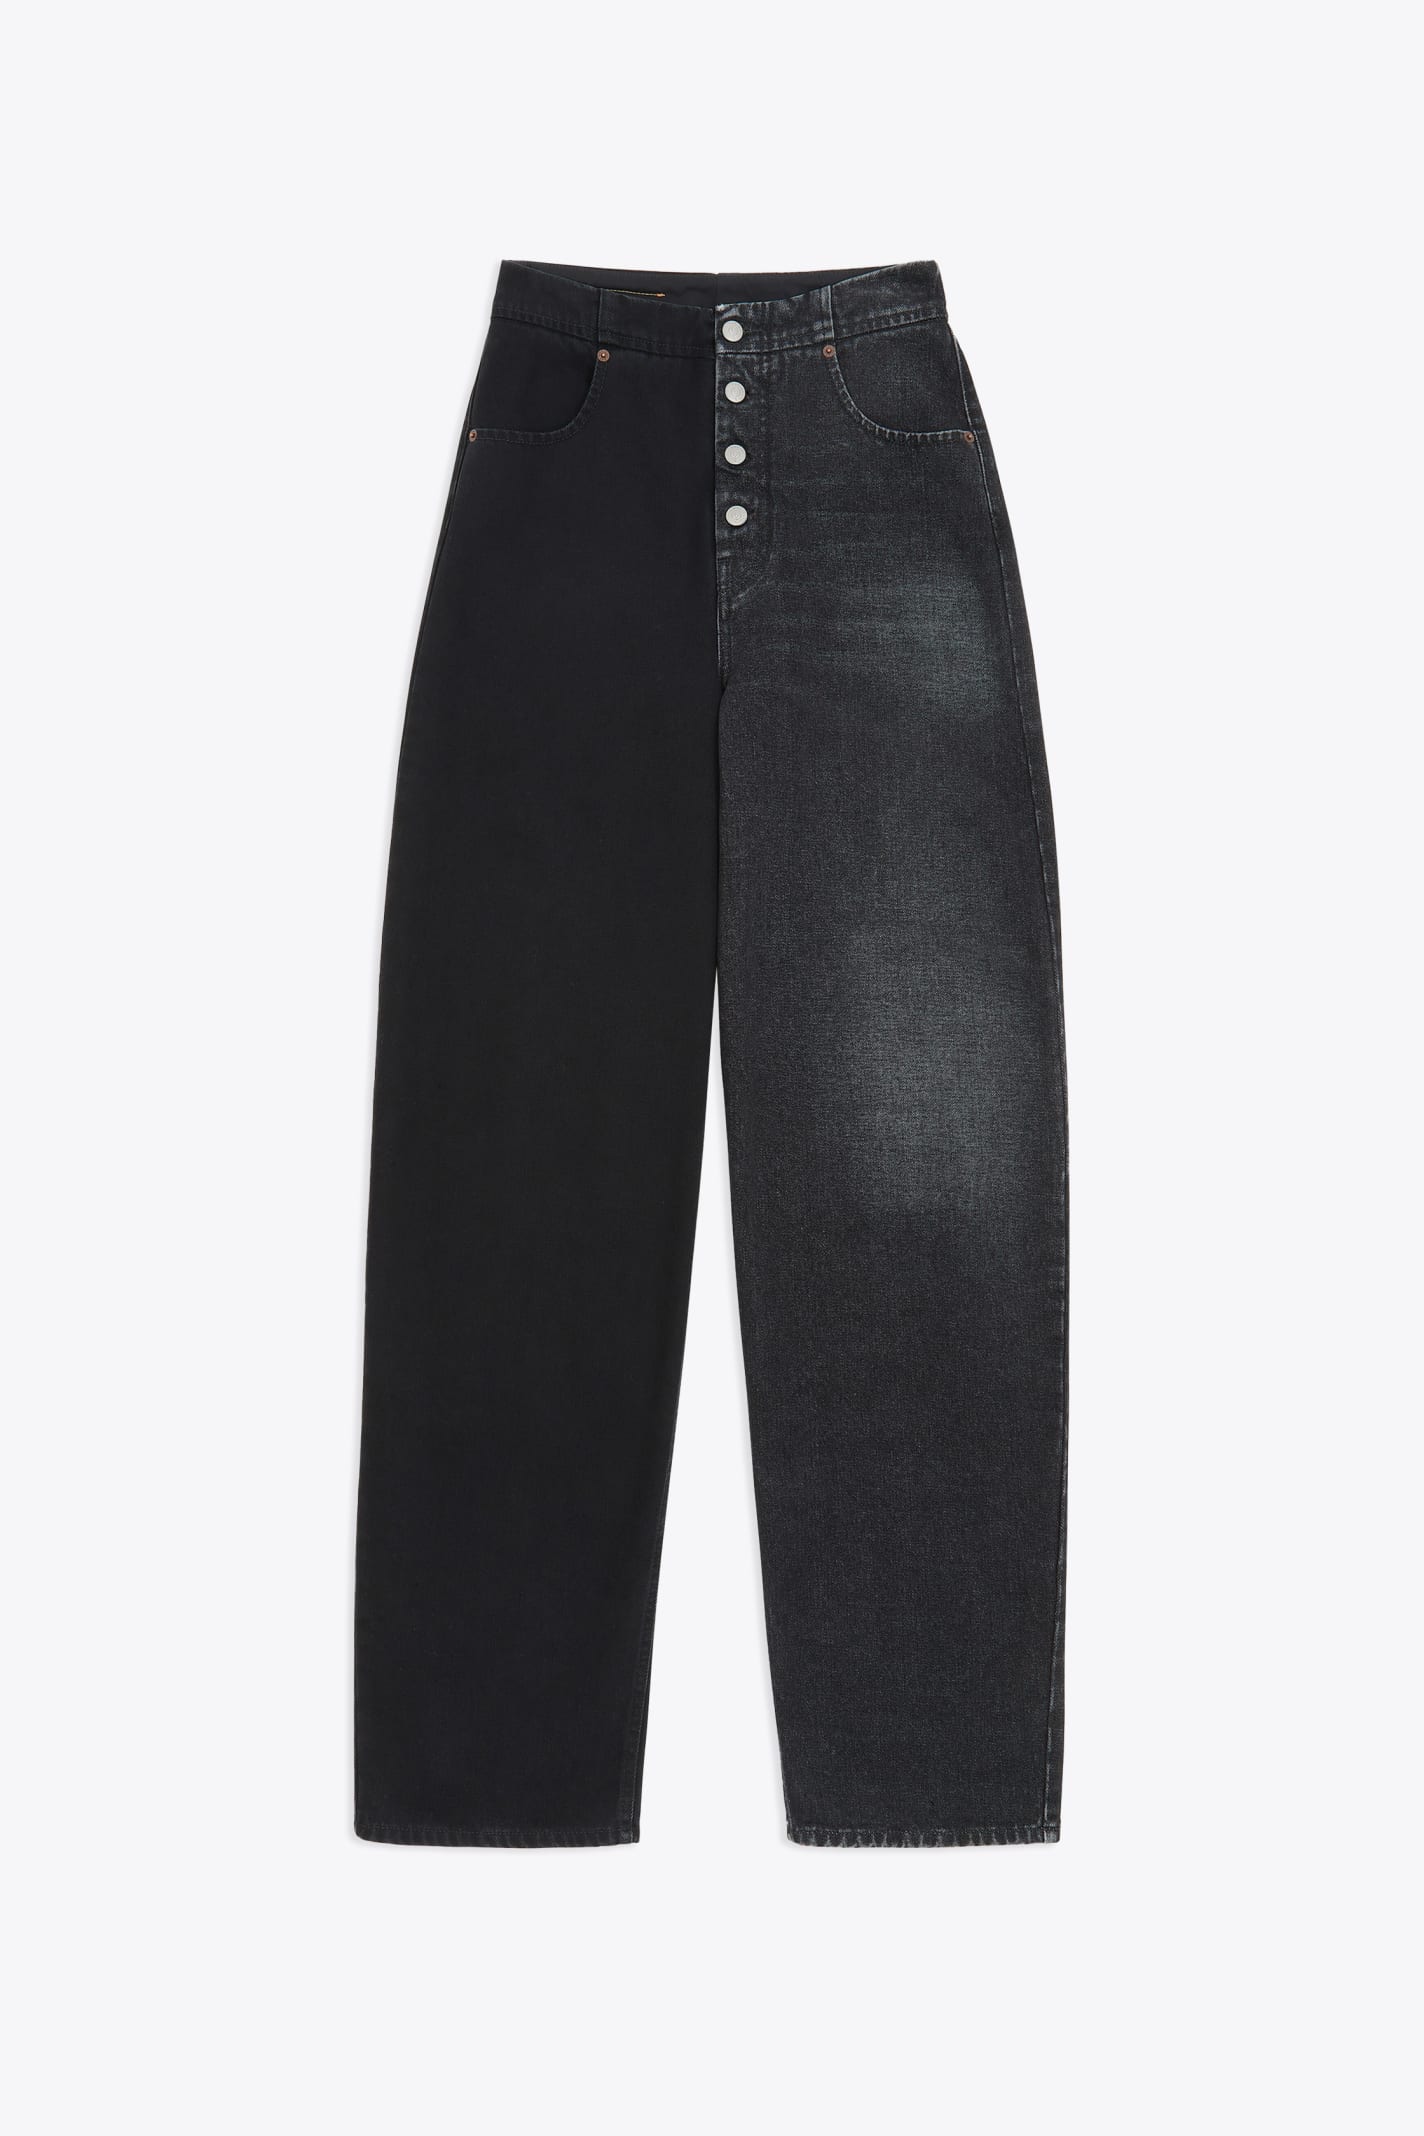 Shop Mm6 Maison Margiela Pantalone 5 Tasche Black And Grey Half And Half Baggy Fit Jeans In Denim Nero